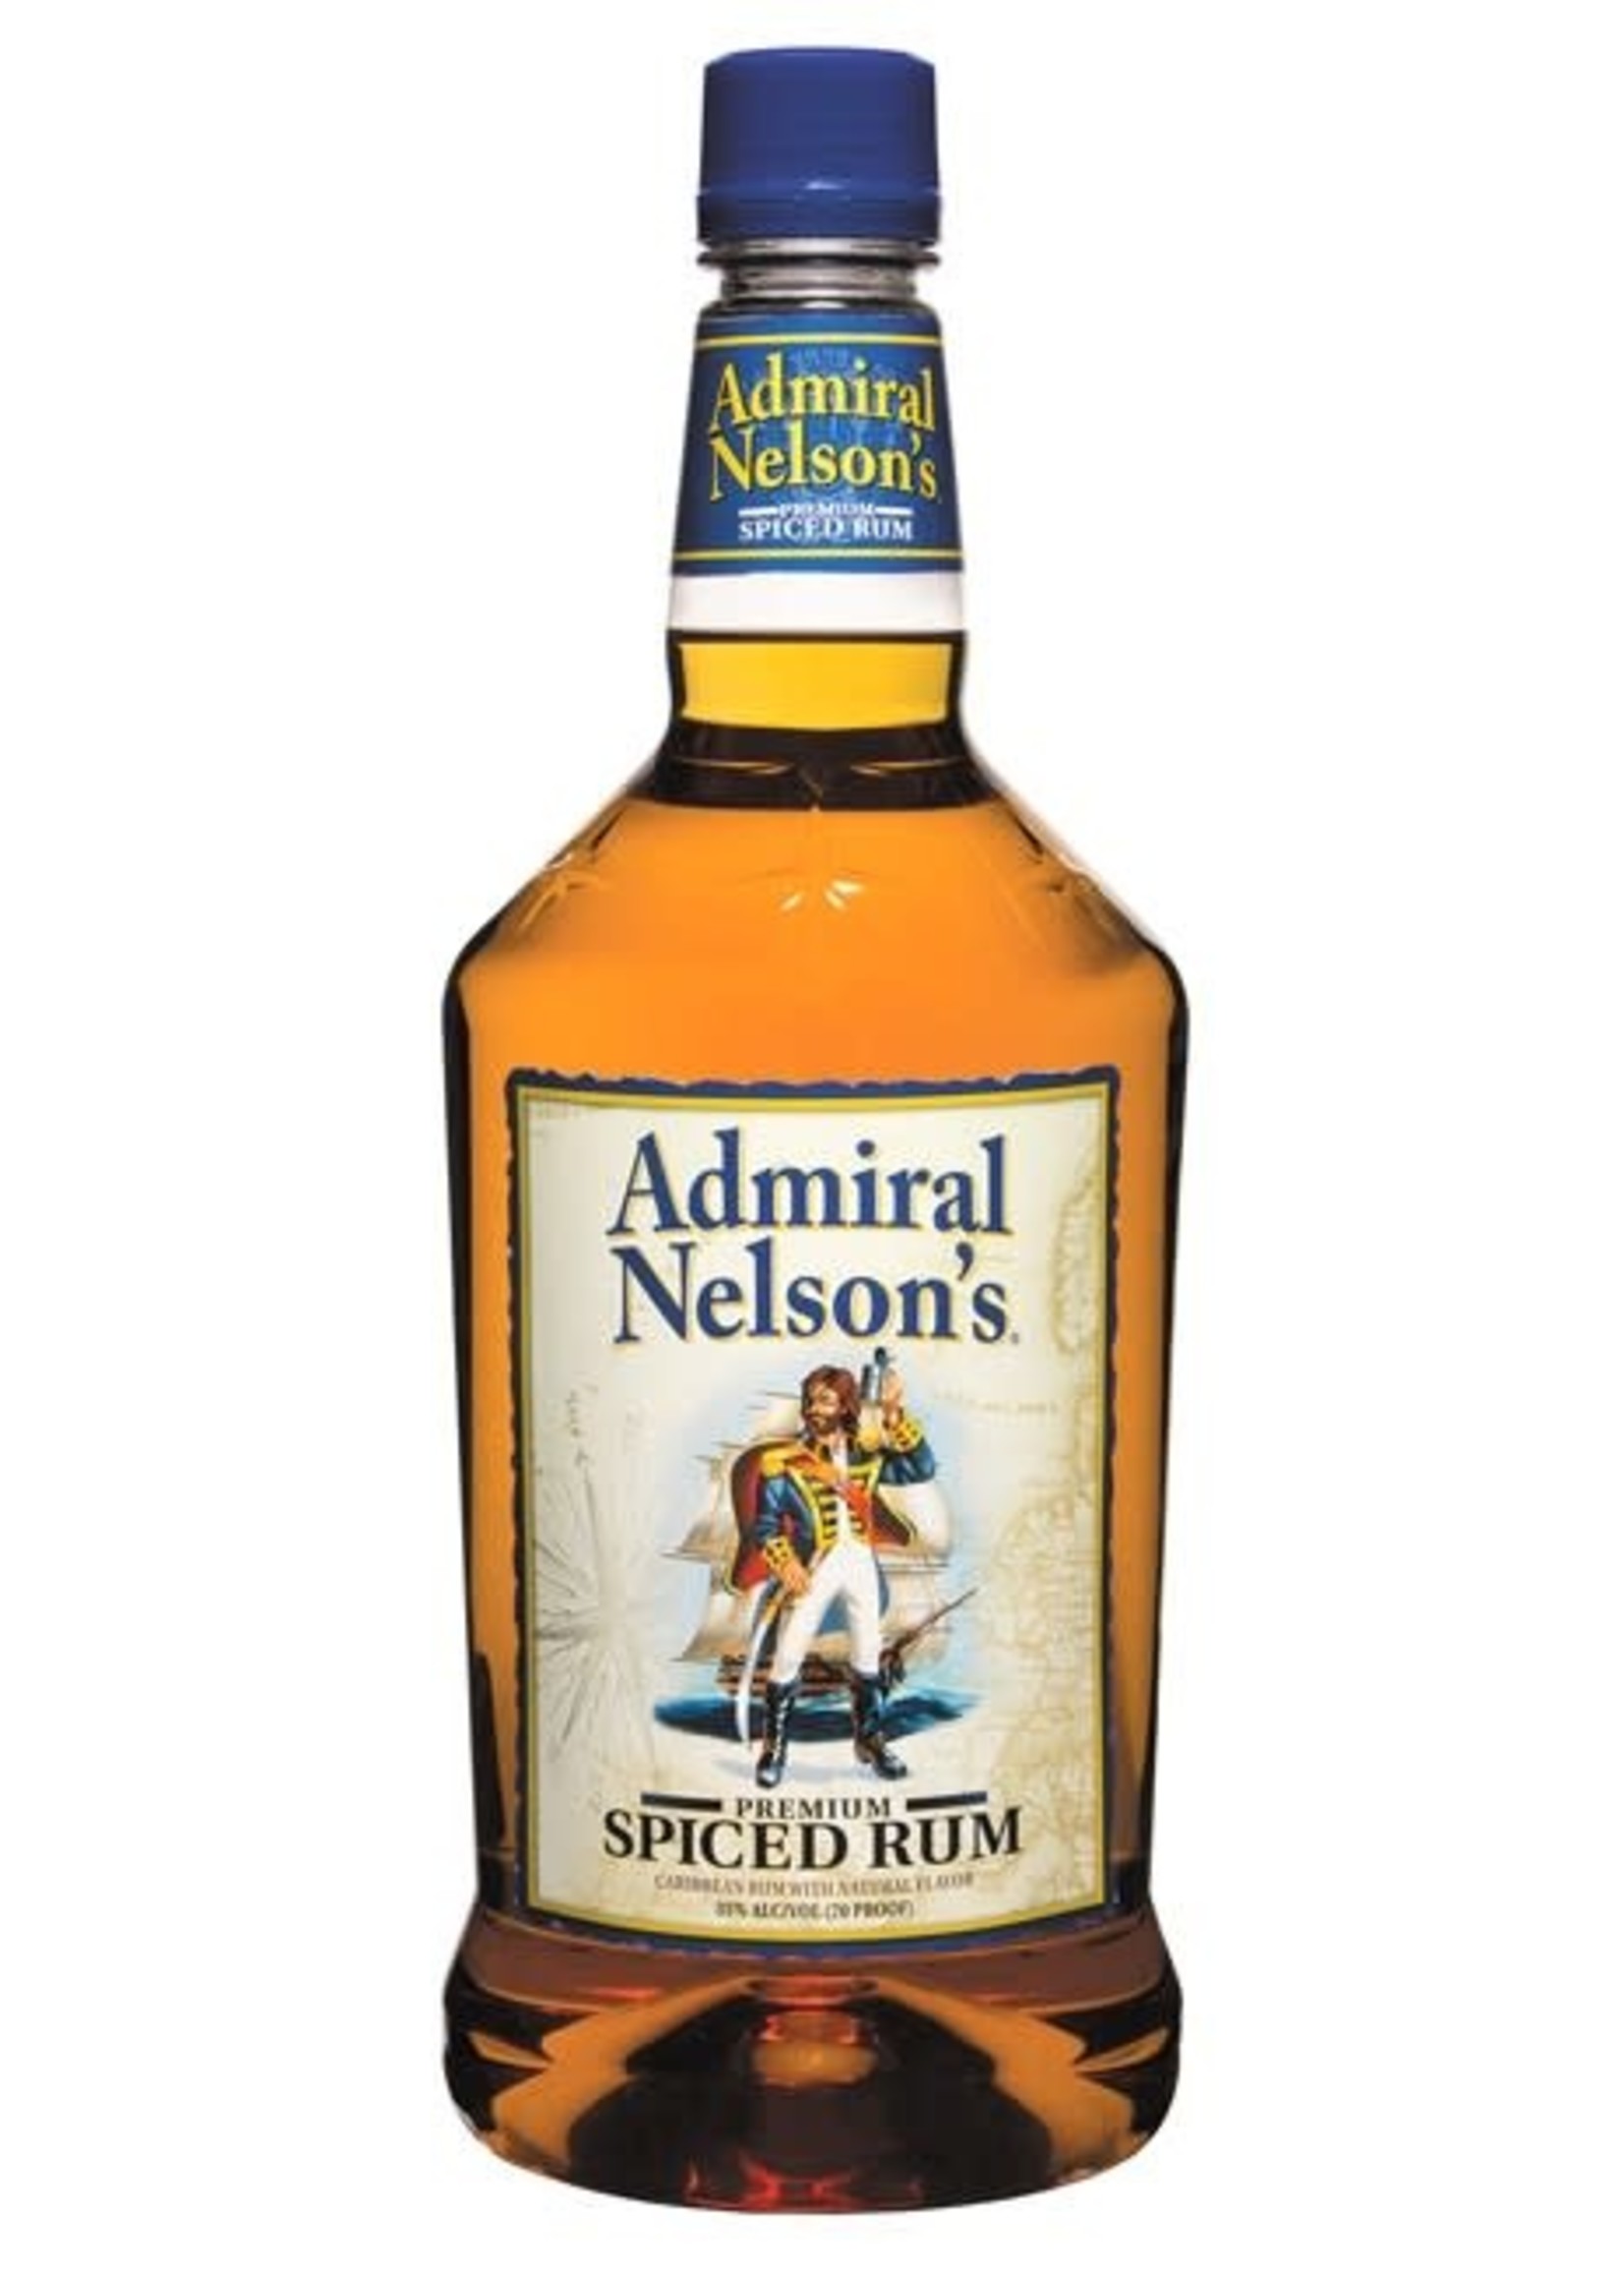 ADMIRAL NELSON'S ADMIRAL NELSON'S	SPICED RUM	1.75L